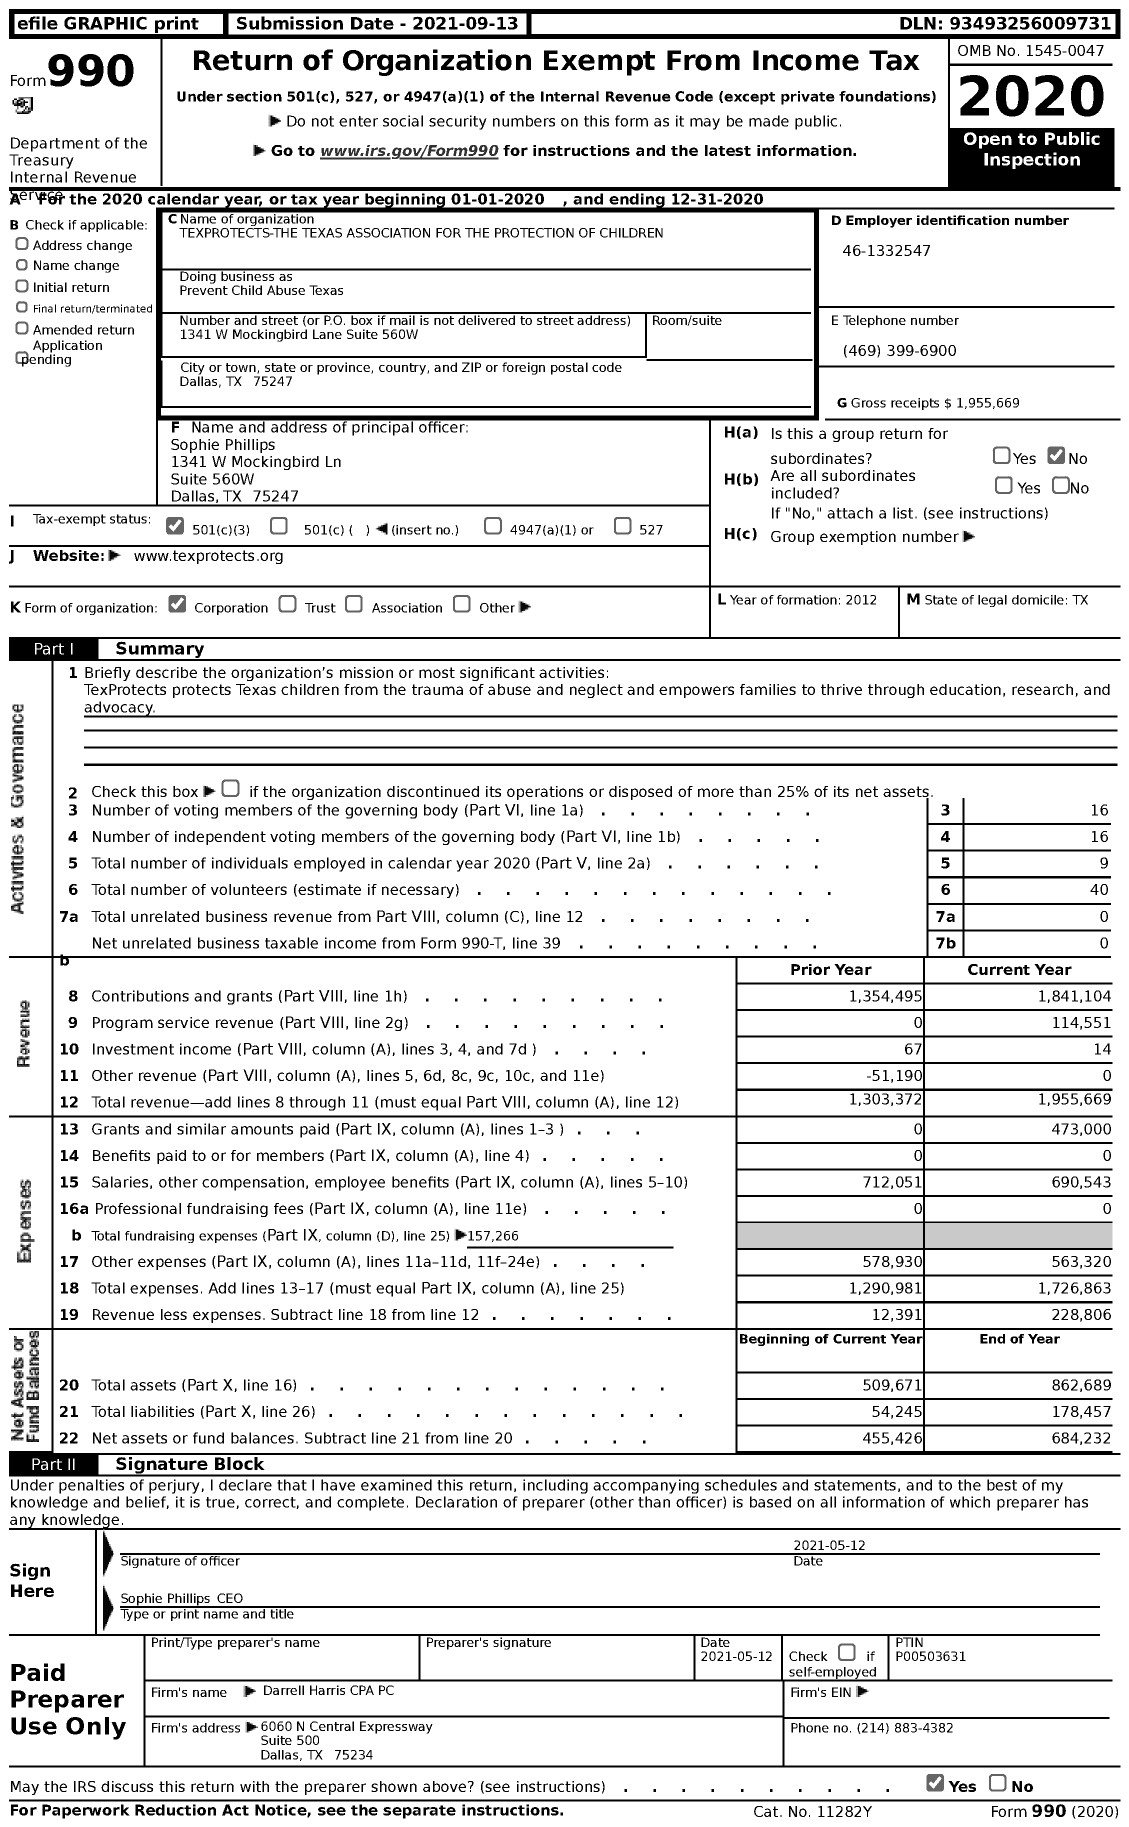 Image of first page of 2020 Form 990 for Prevent Child Abuse Texas / Texprotects-The Texas Association for the Protection of Children